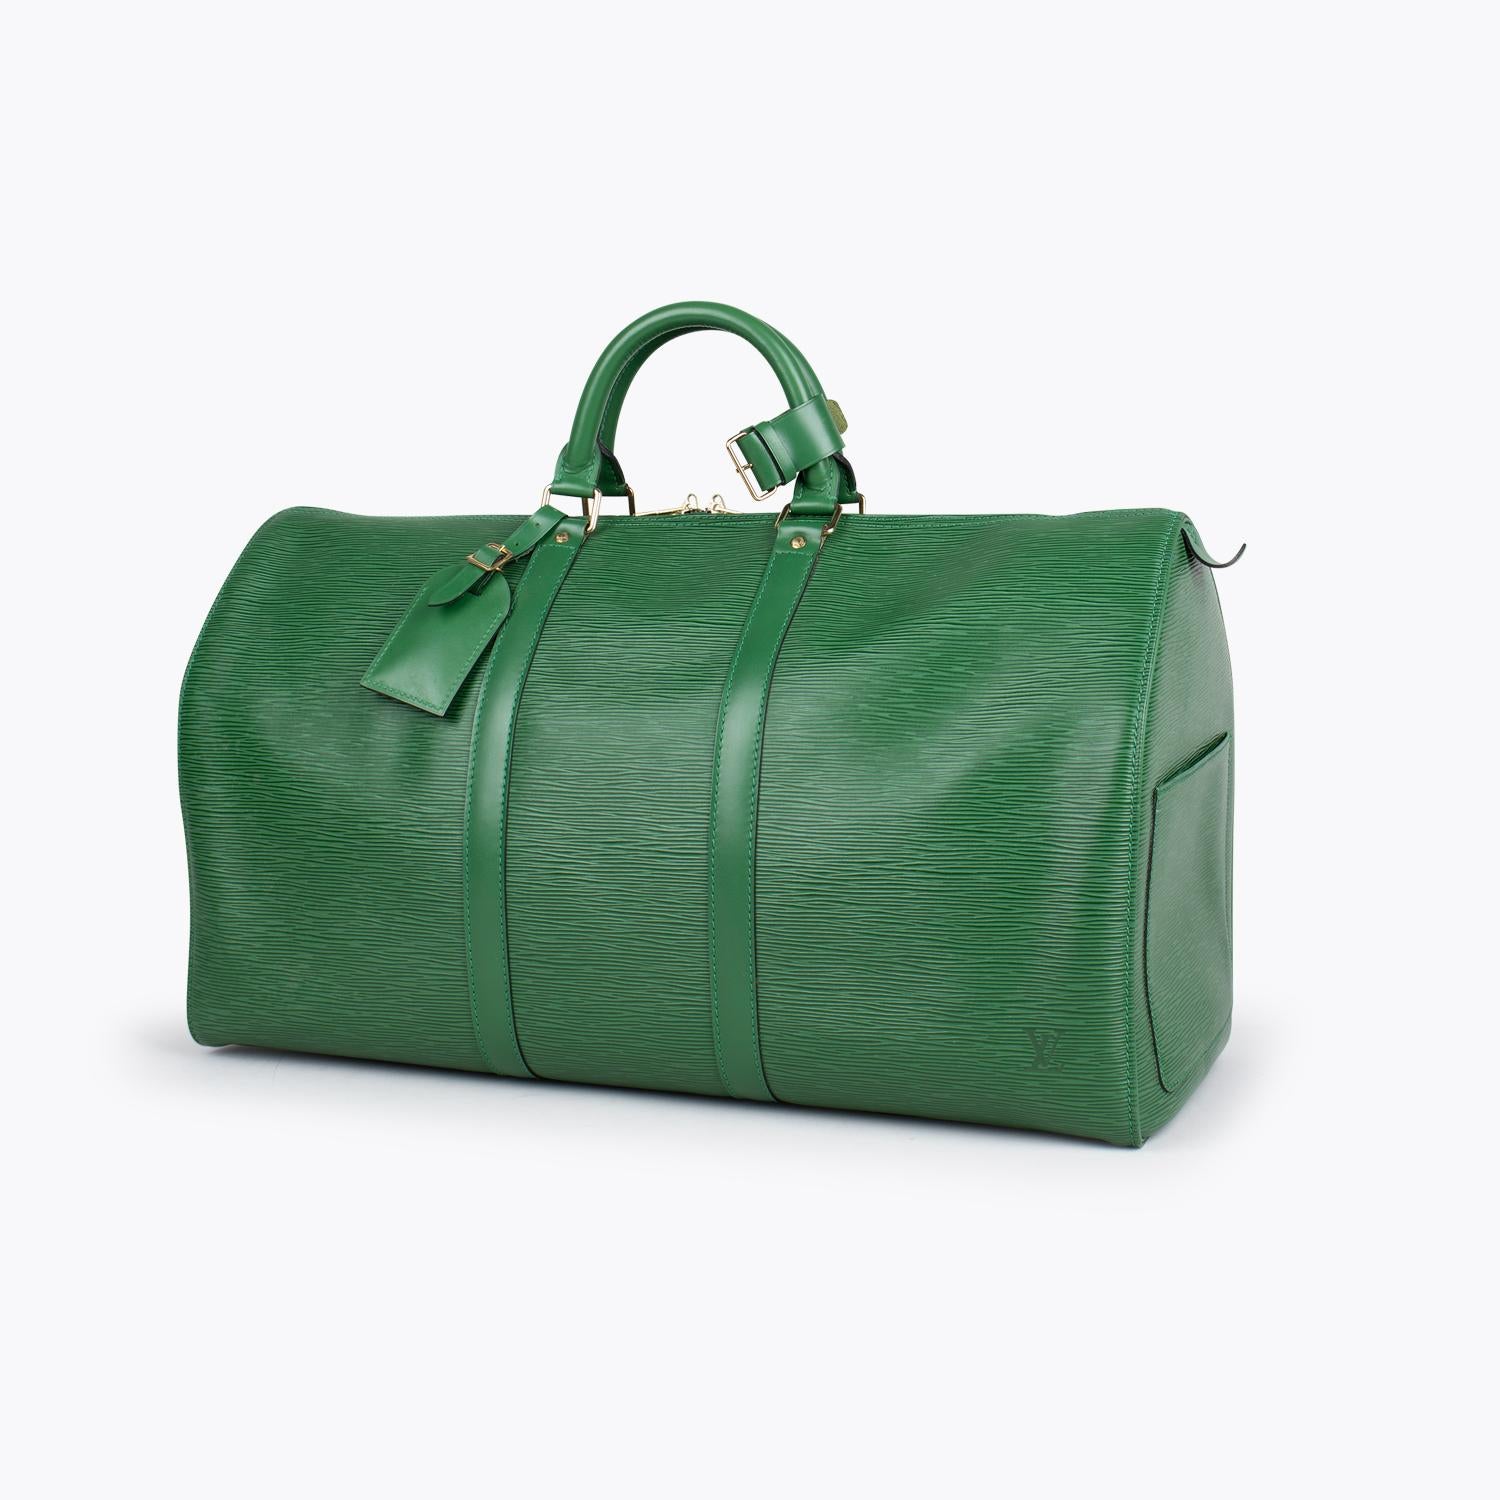 Borneo Green Epi leather Louis Vuitton Keepall 50 with

– Brass hardware
– Black contrast stitching throughout
– Dual rolled top handles
– Single slit pocket at exterior side
– Embossed logo embellishment at front face, tonal suede interior and zip